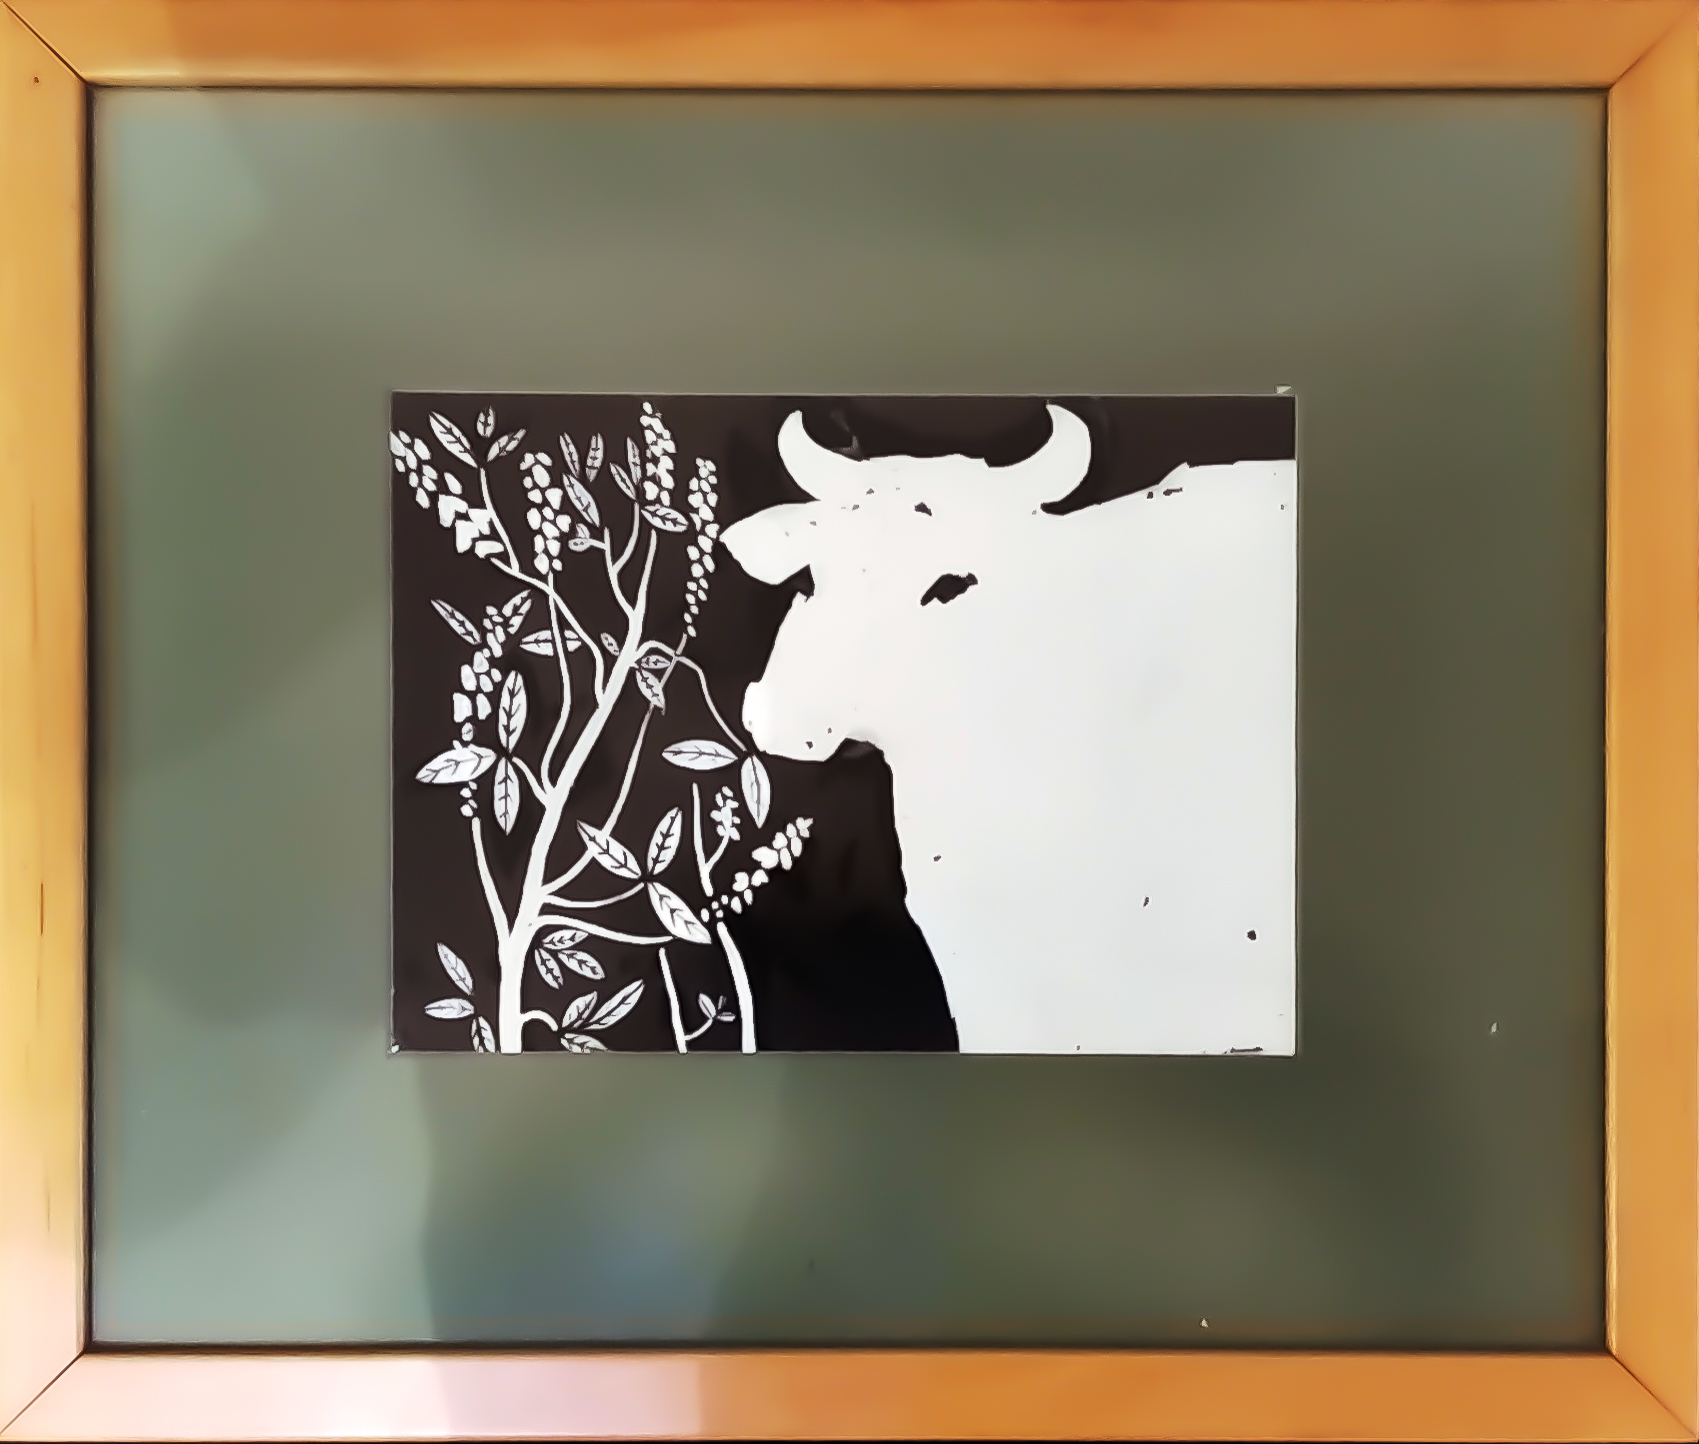 From the series "Cows" 0